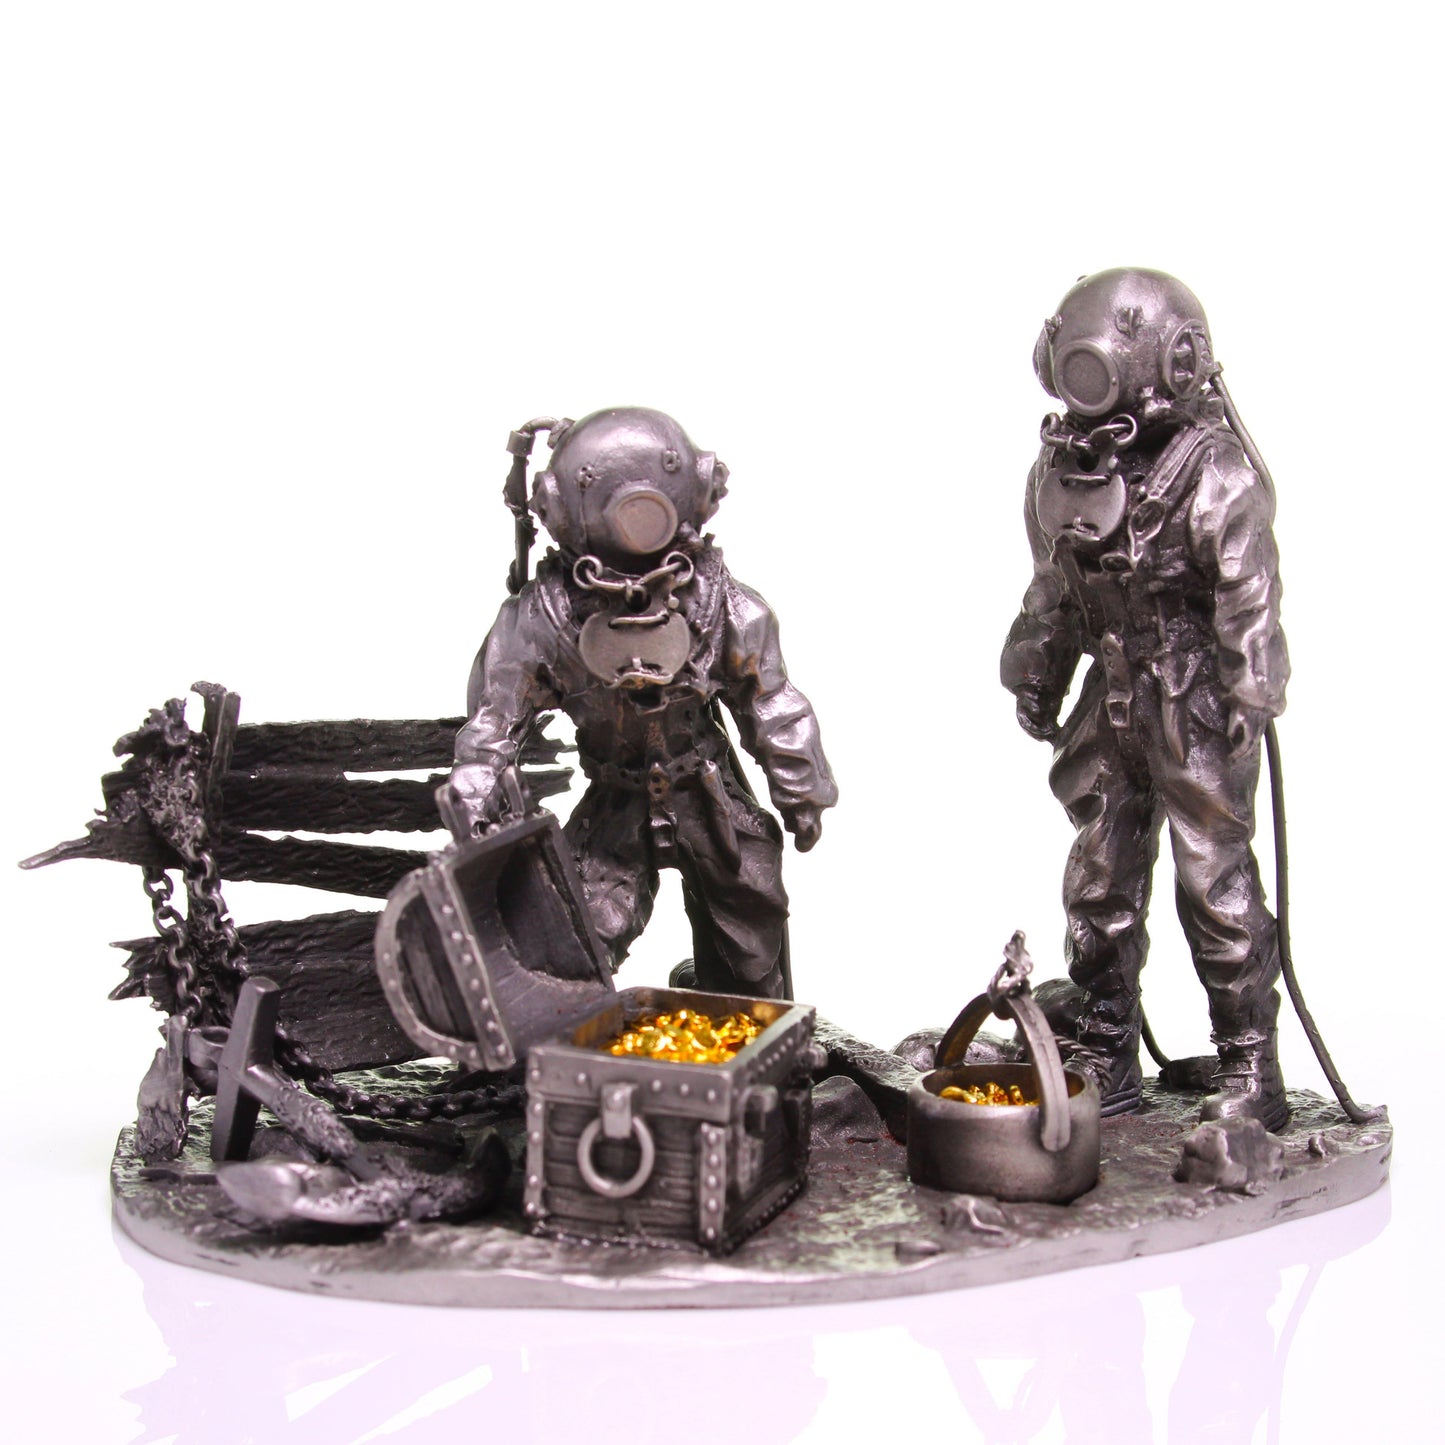 PMS-02 Treasures of the Deep - Pewter - Divers Gifts